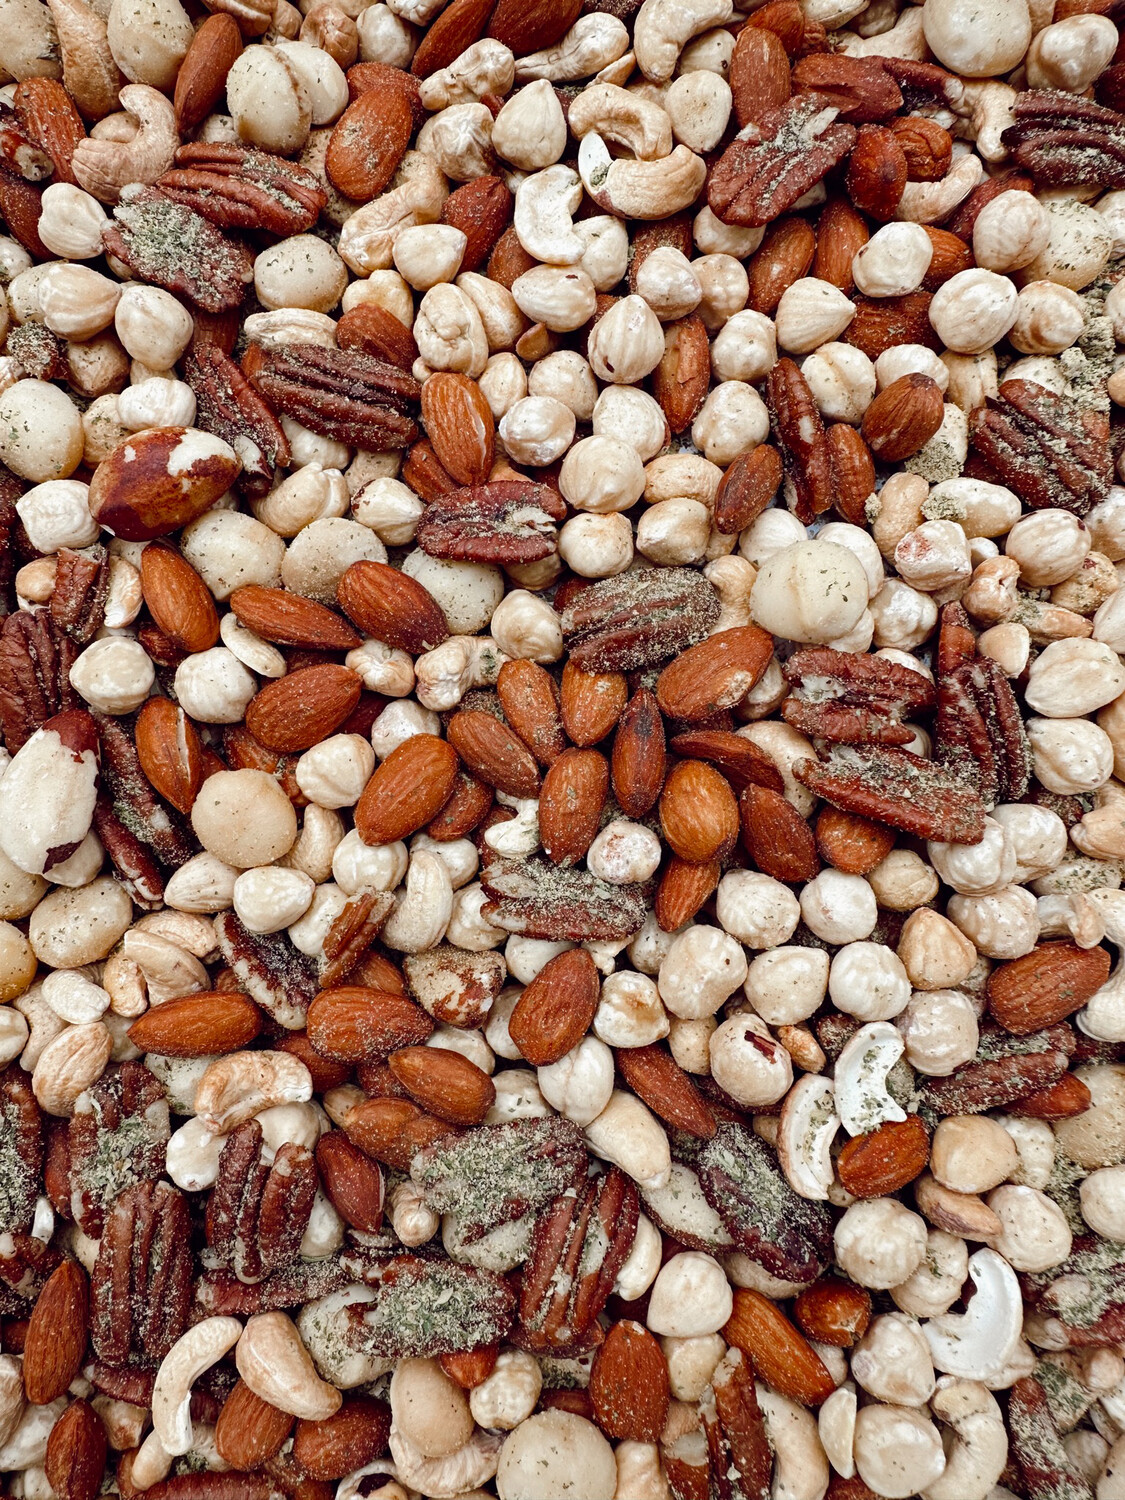 Italian Herbed & Roasted Mixed Nuts